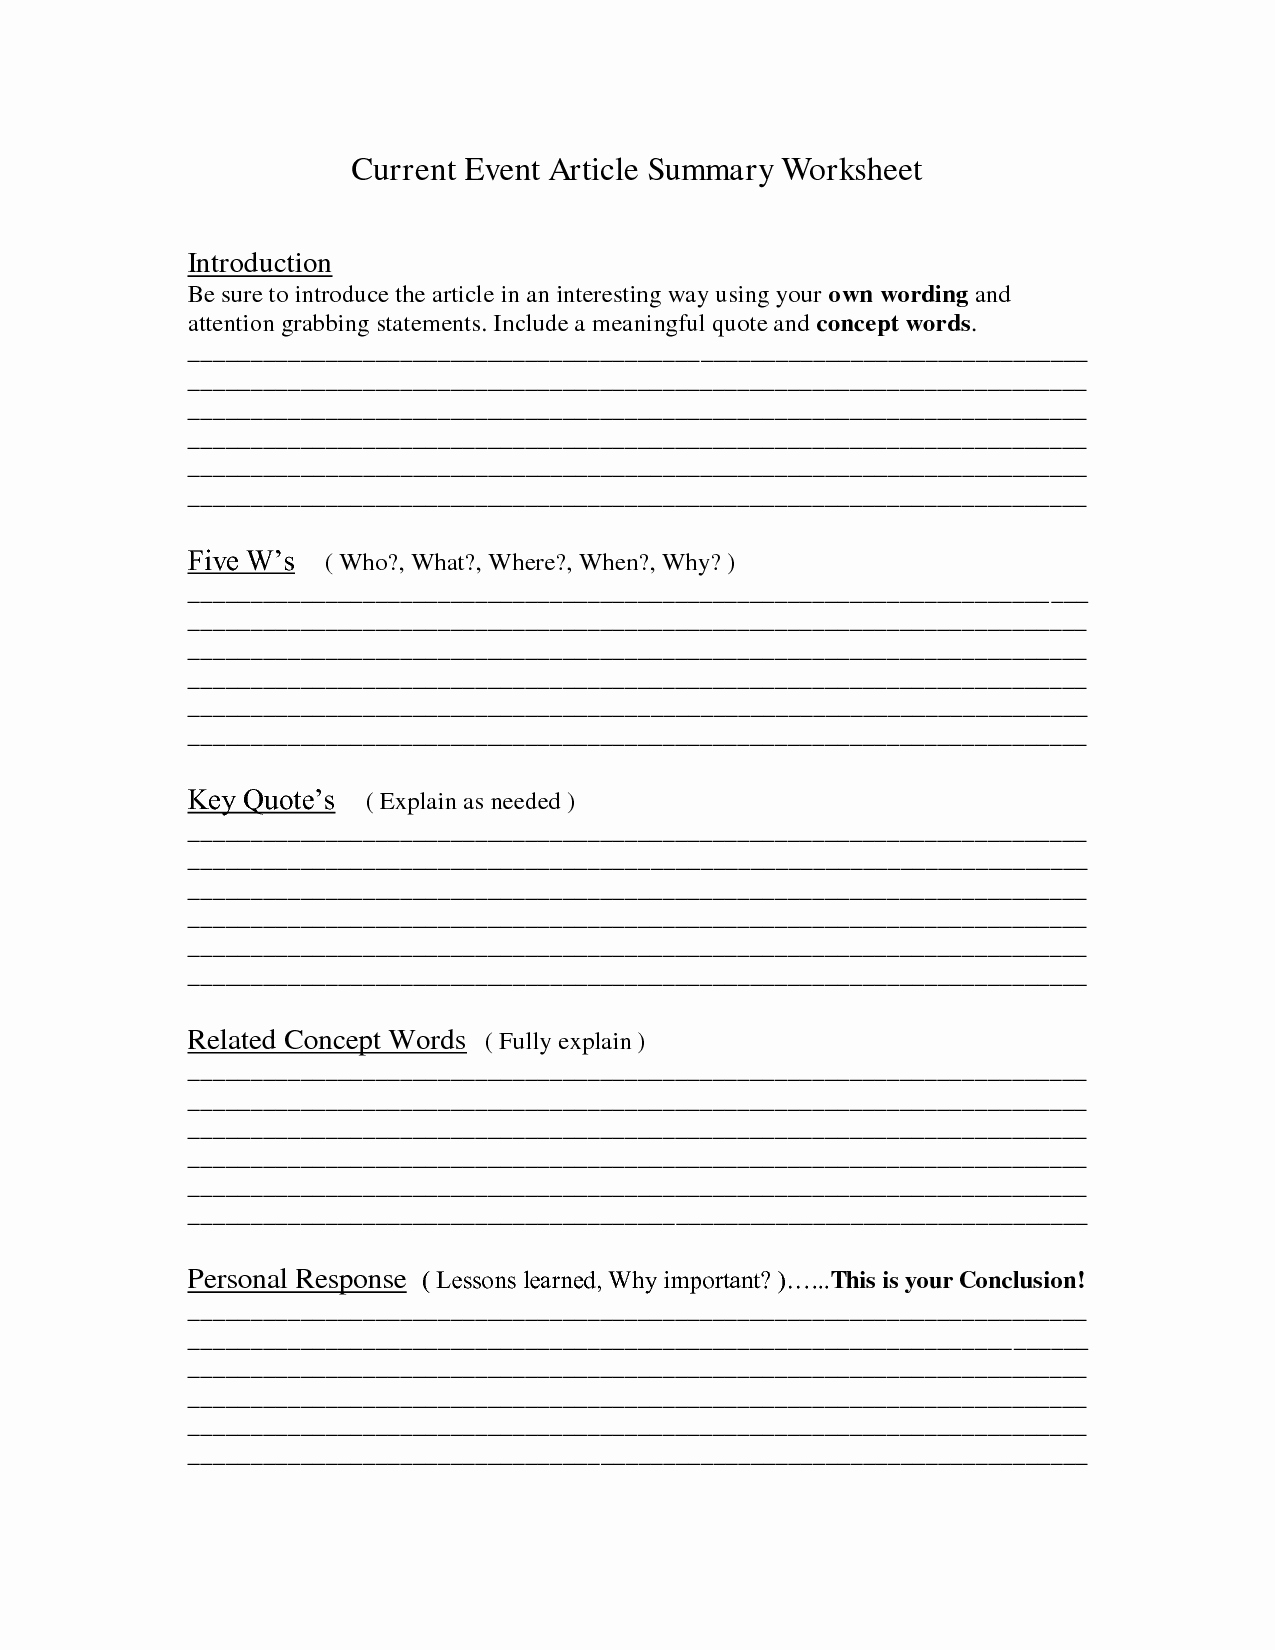 Current events Paper Outline Luxury 26 Of Science Current events Worksheet Template